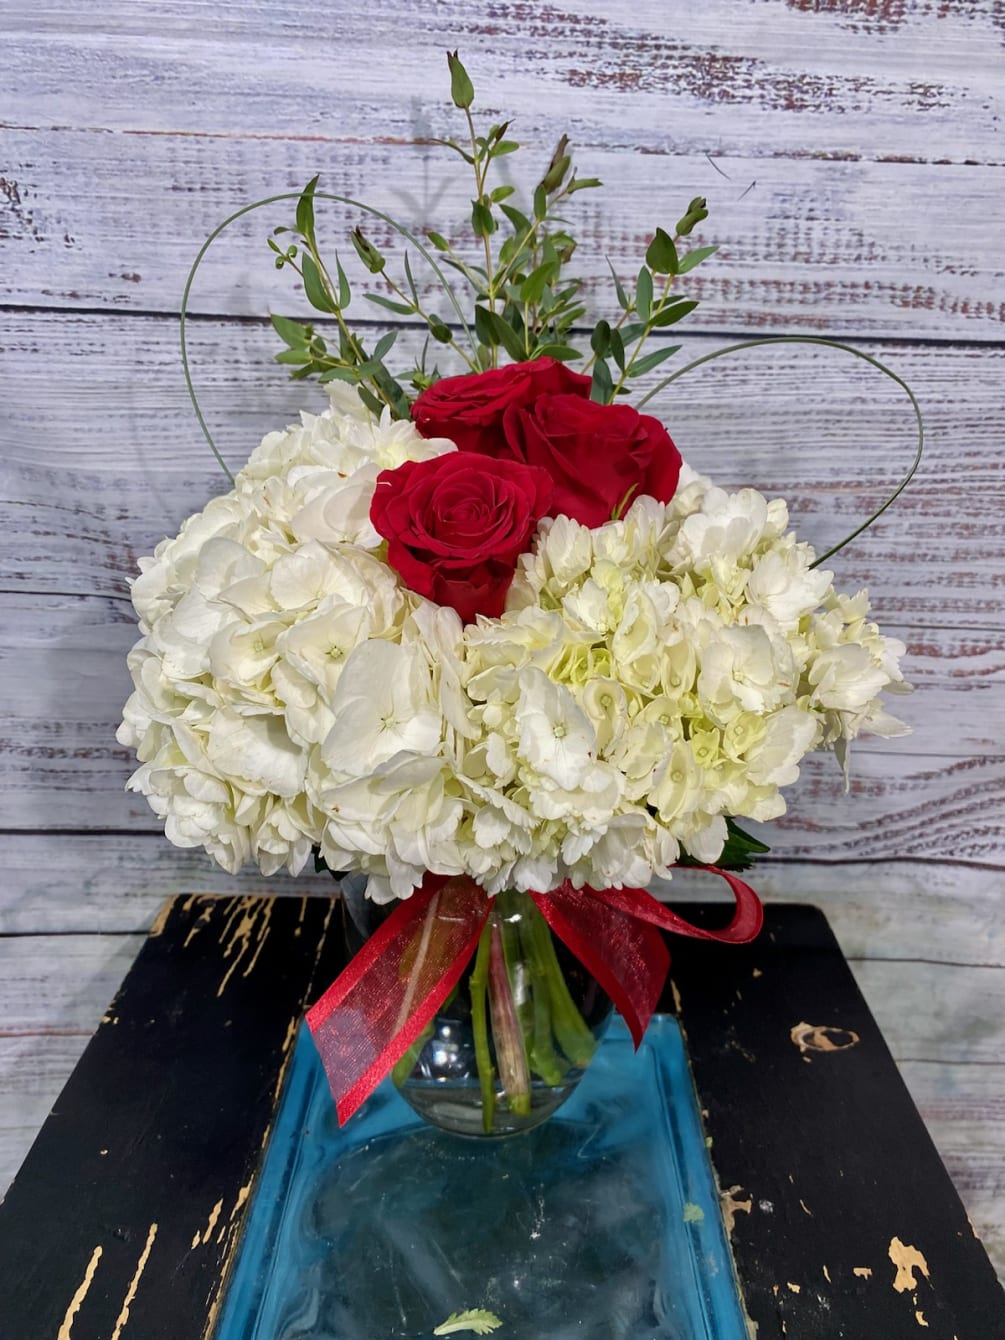 Beautiful white hydrangeas embracing red roses with heart